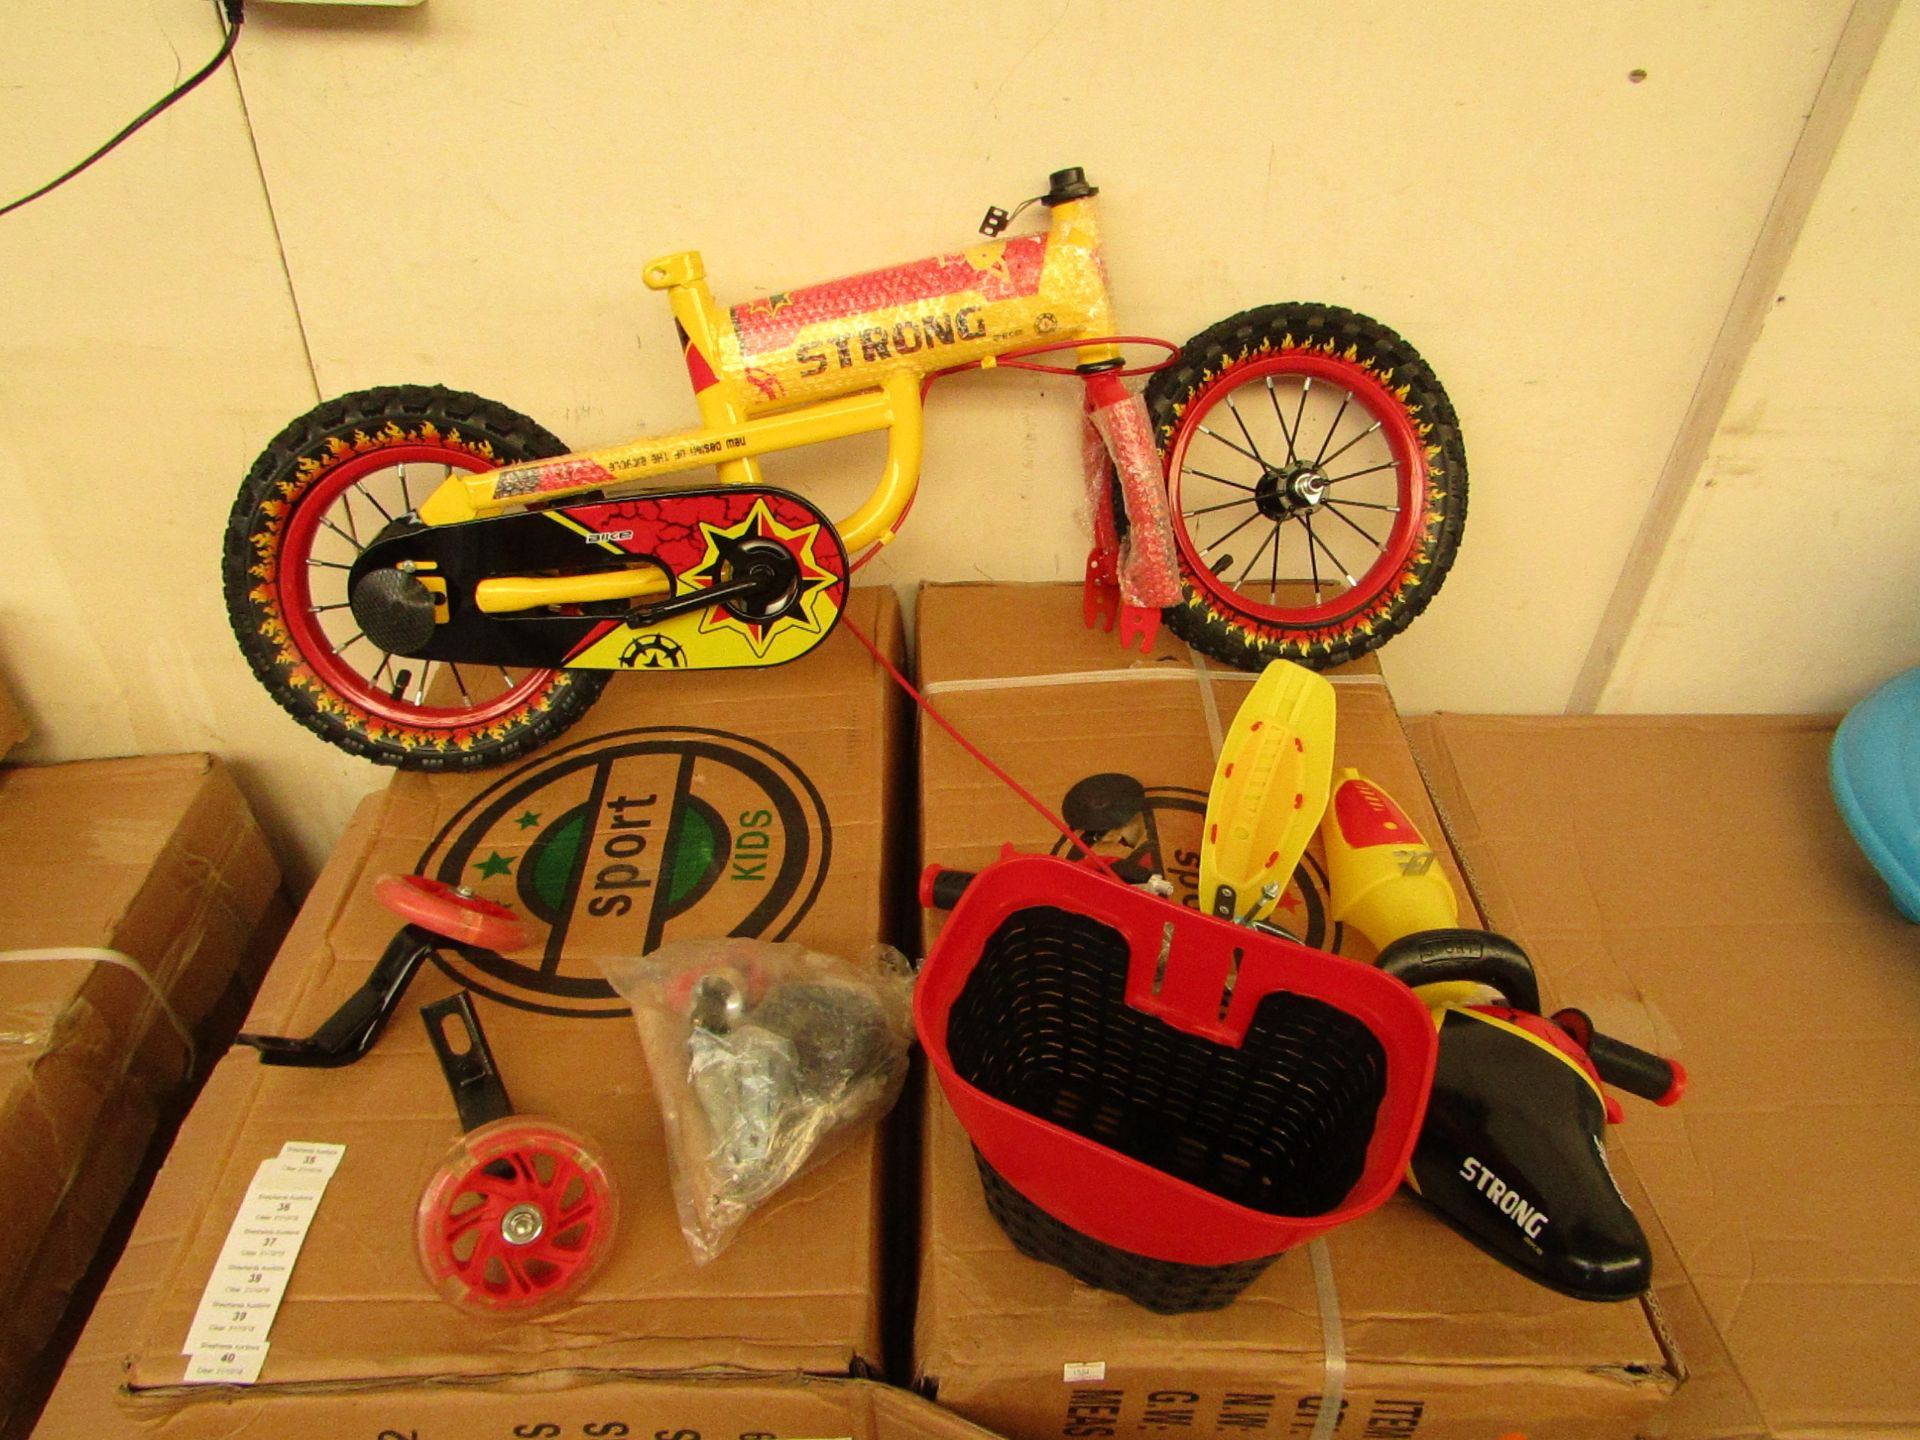 Sport kids Blue colour bicycle with stabilisers, new and boxed. (Picture is to illustrate design not